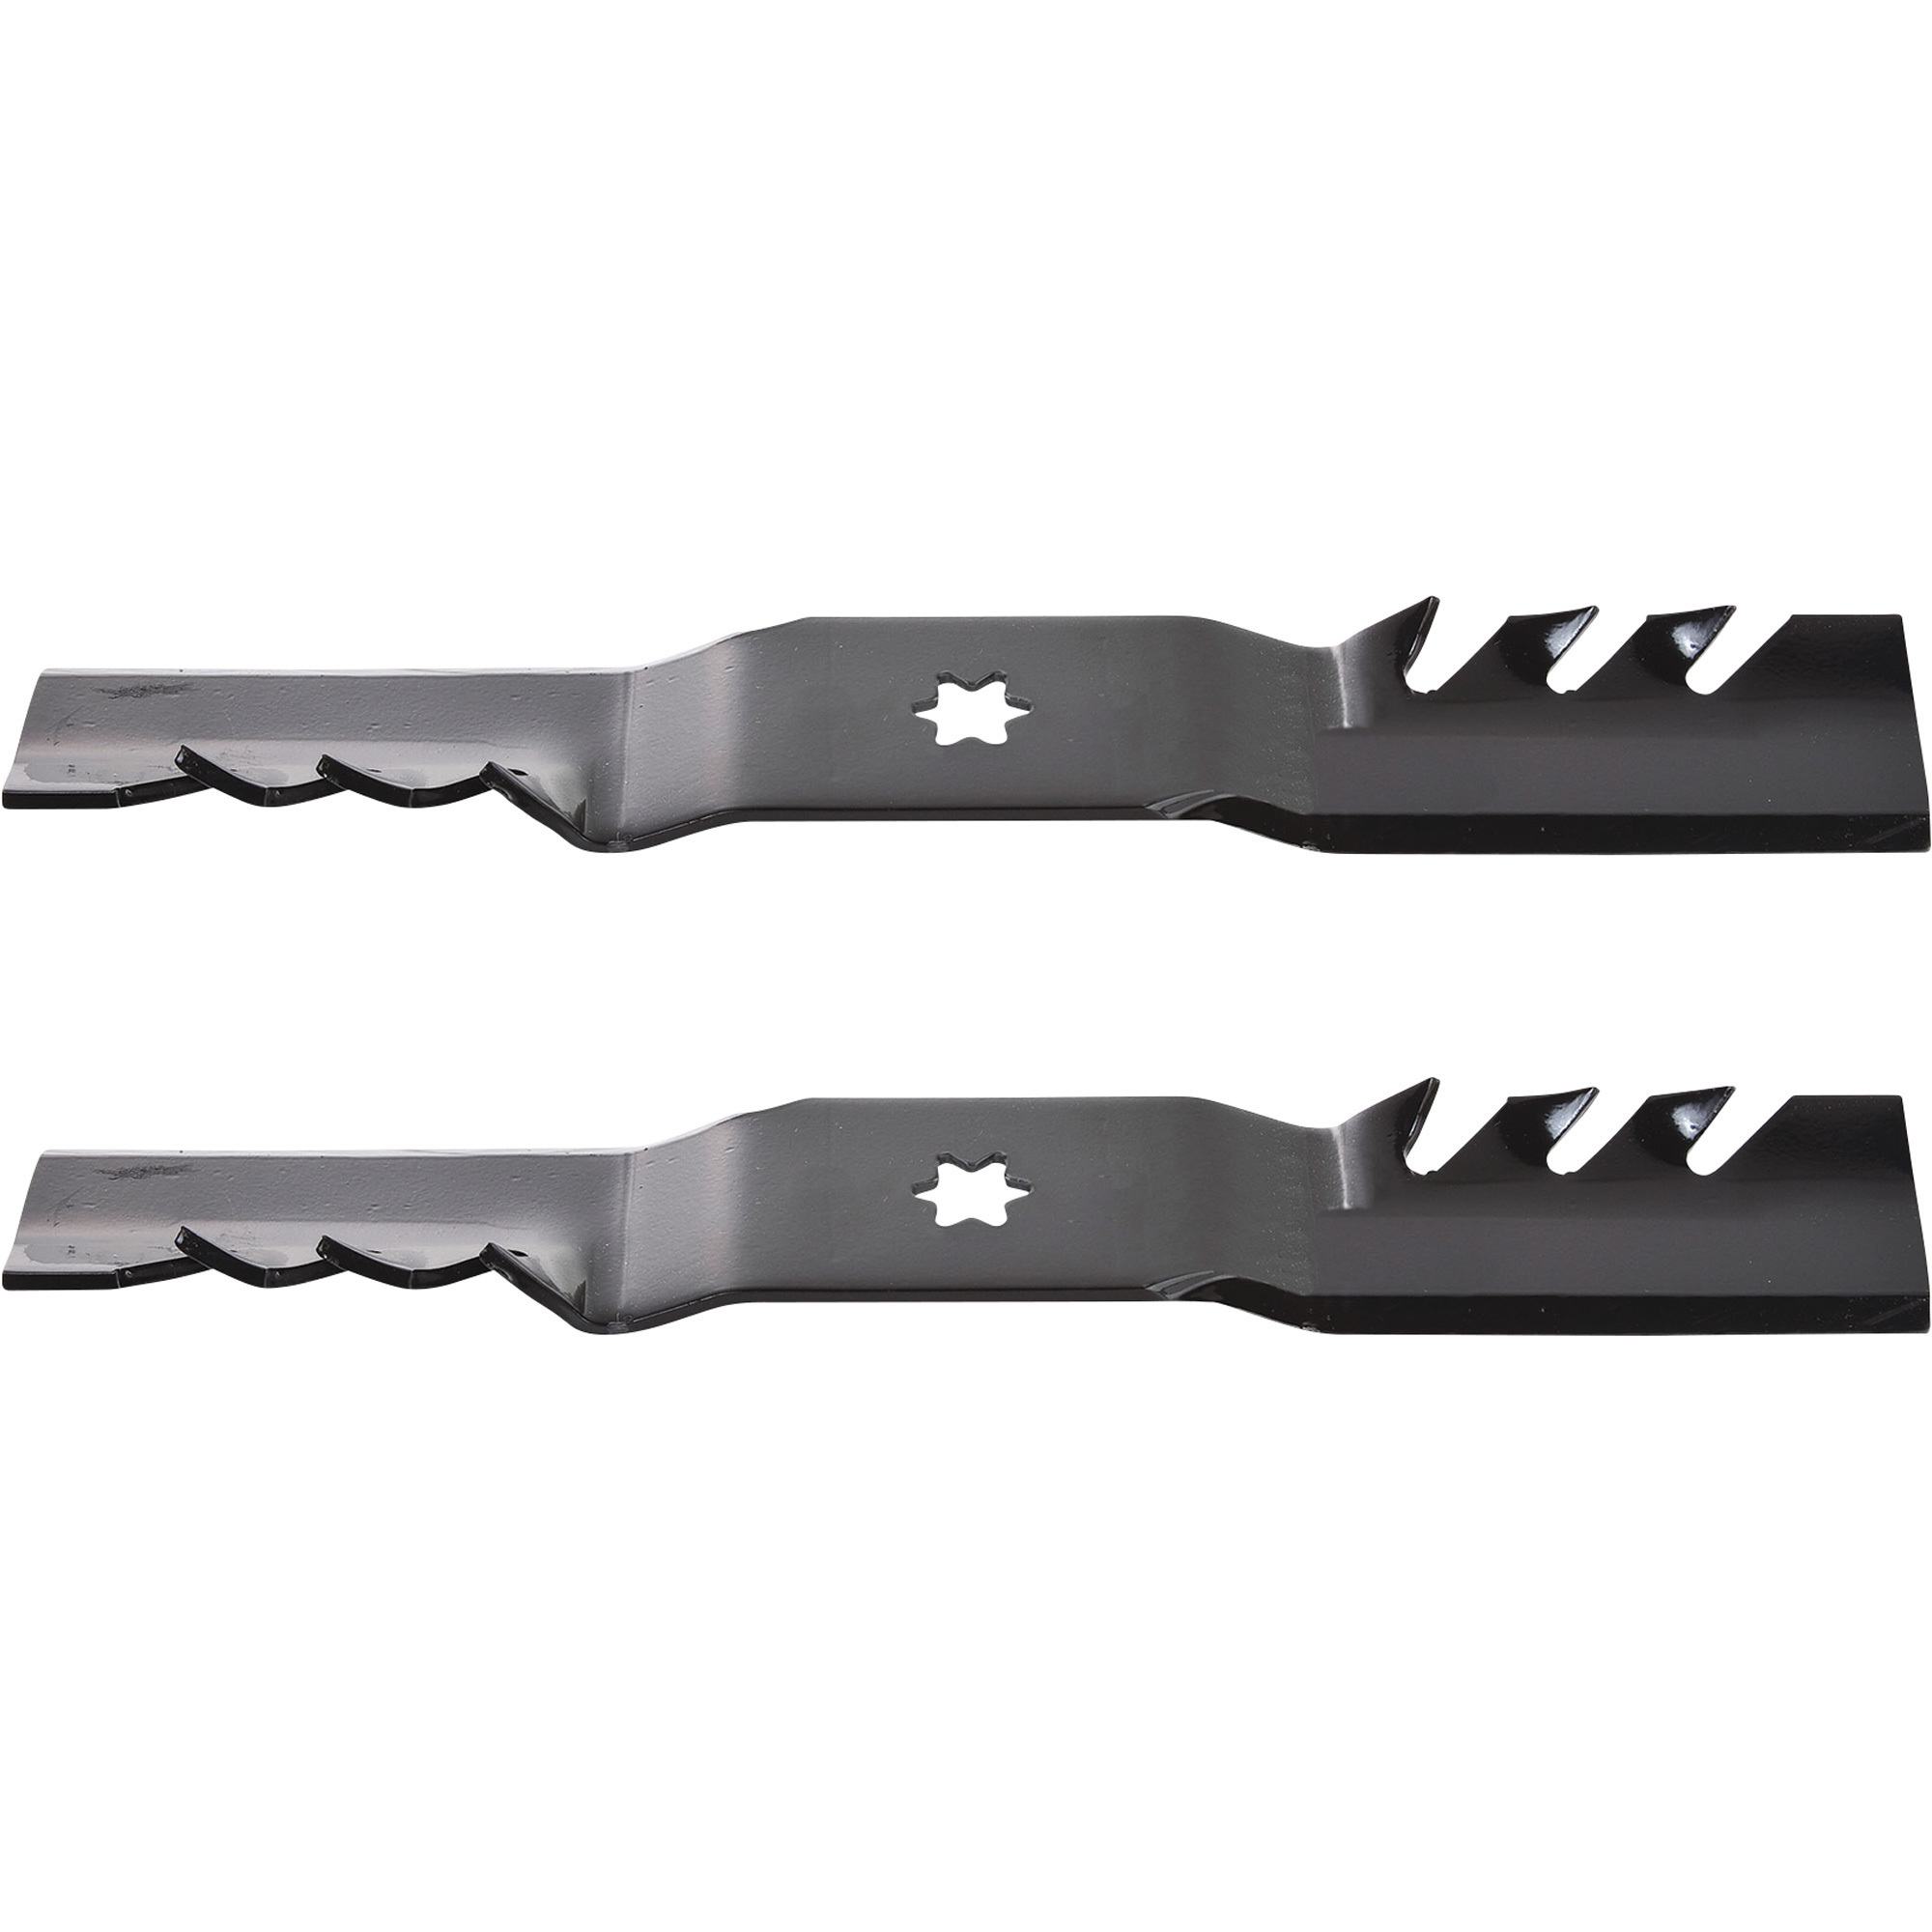 Oregon Gator Replacement Lawn Mower Blades, 2-Piece Set, Fits 46Inch Mowers, Model 528920